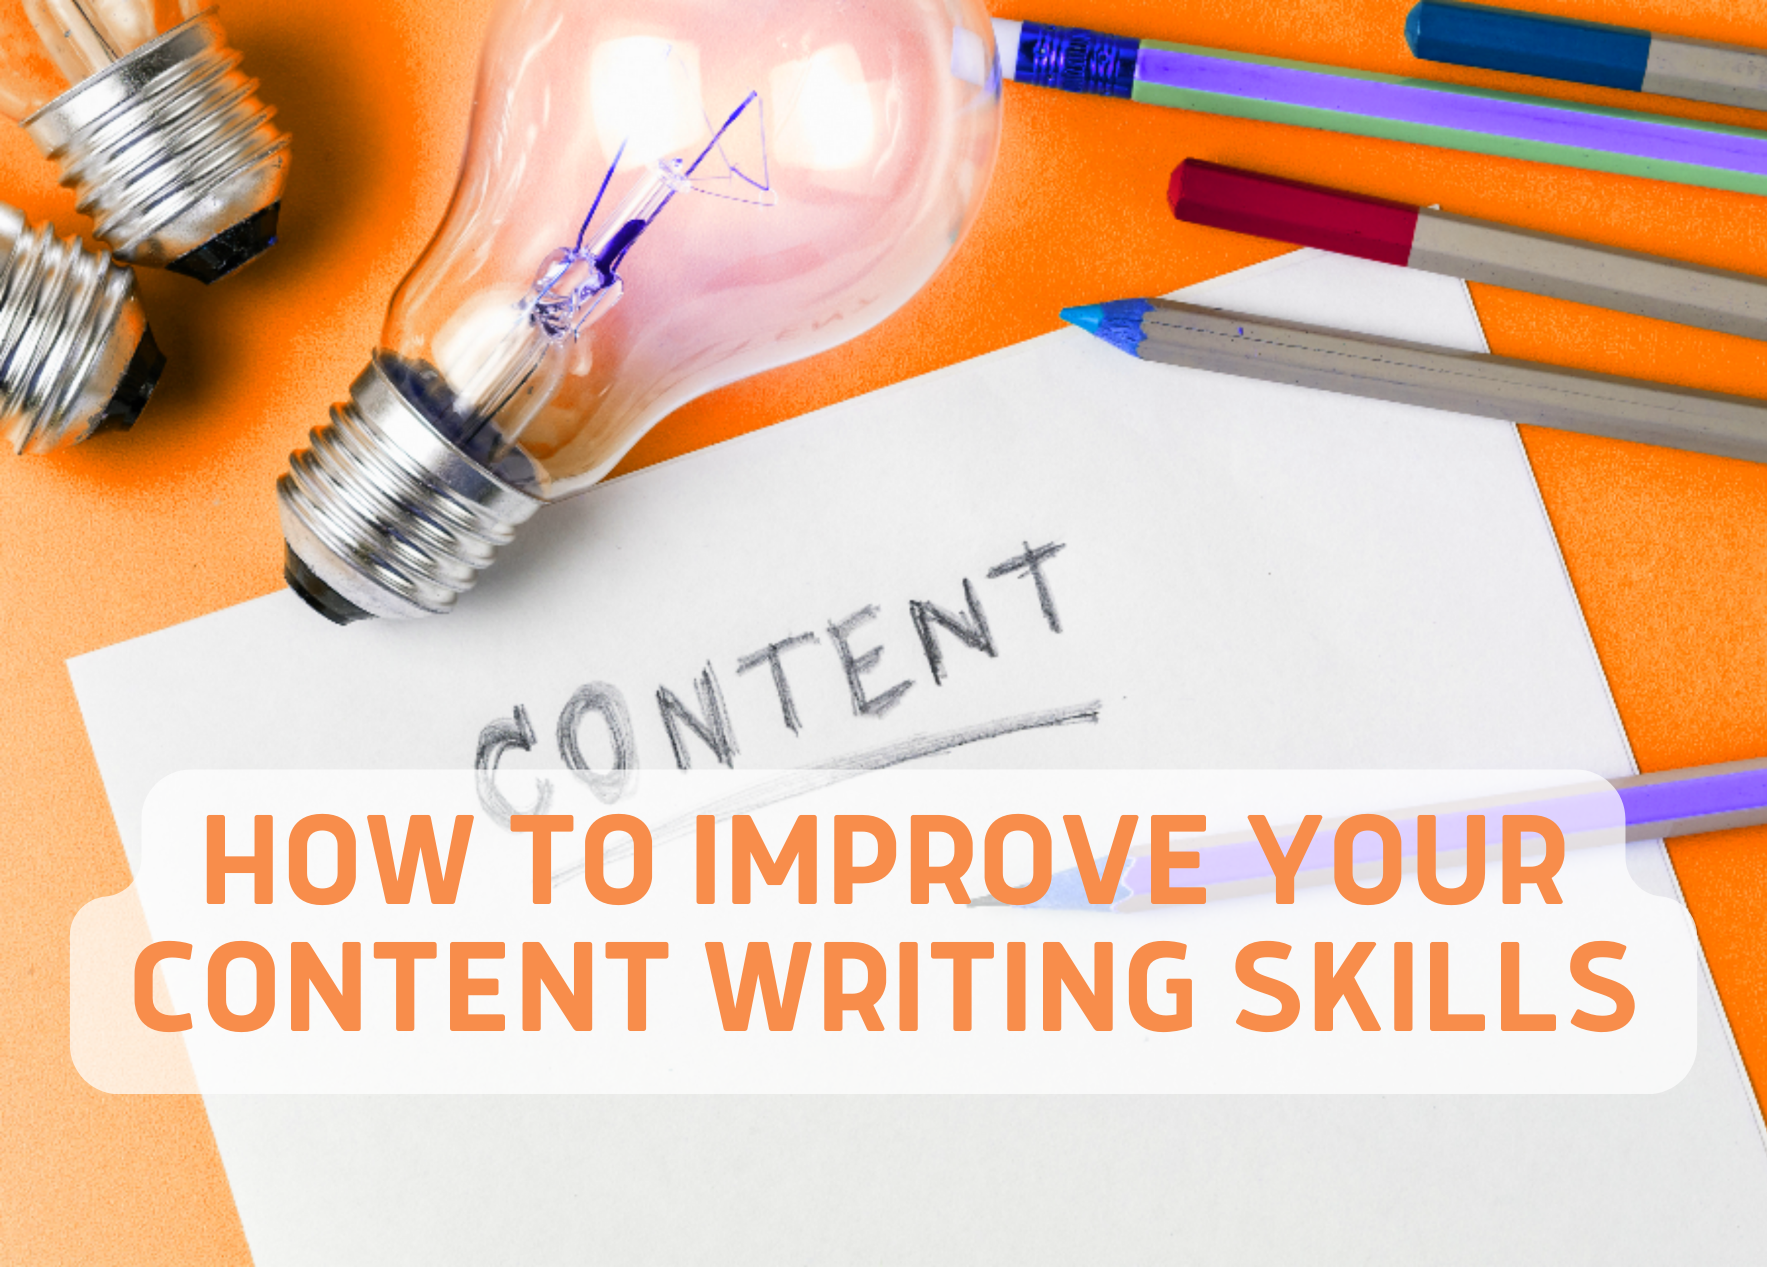 Improve your Content Writing Skills With Promo Fuzz